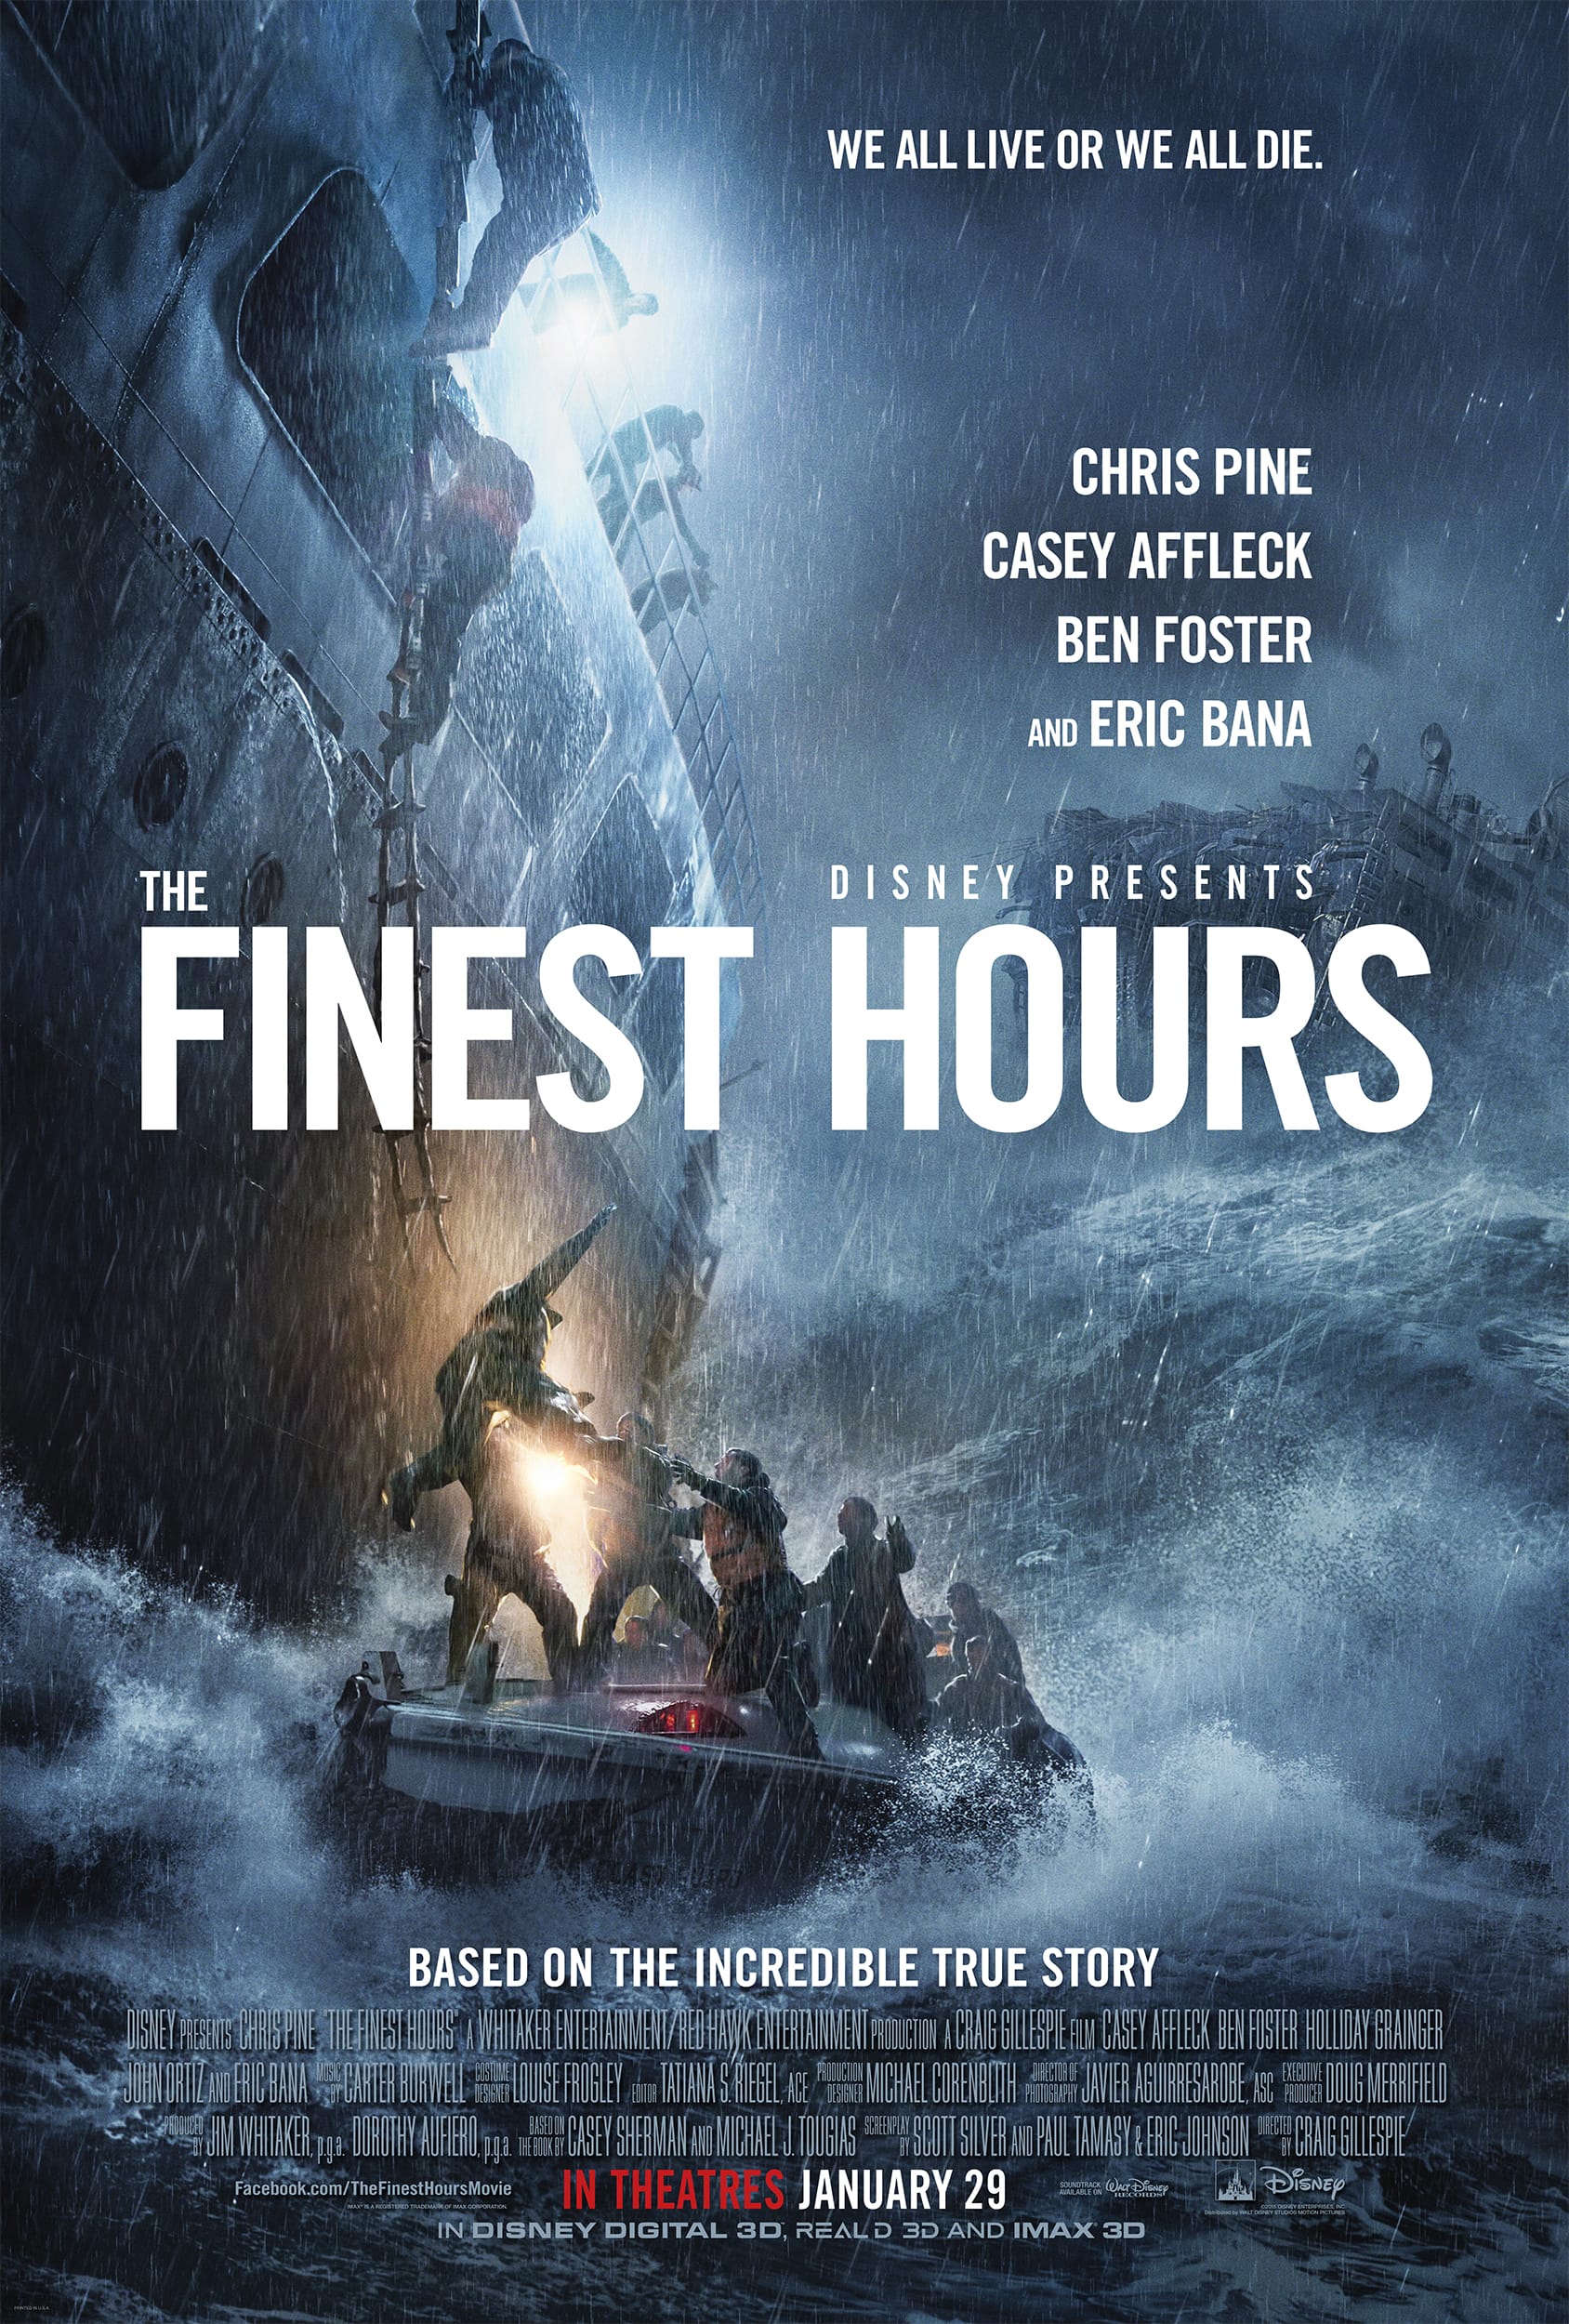 TheFinestHours